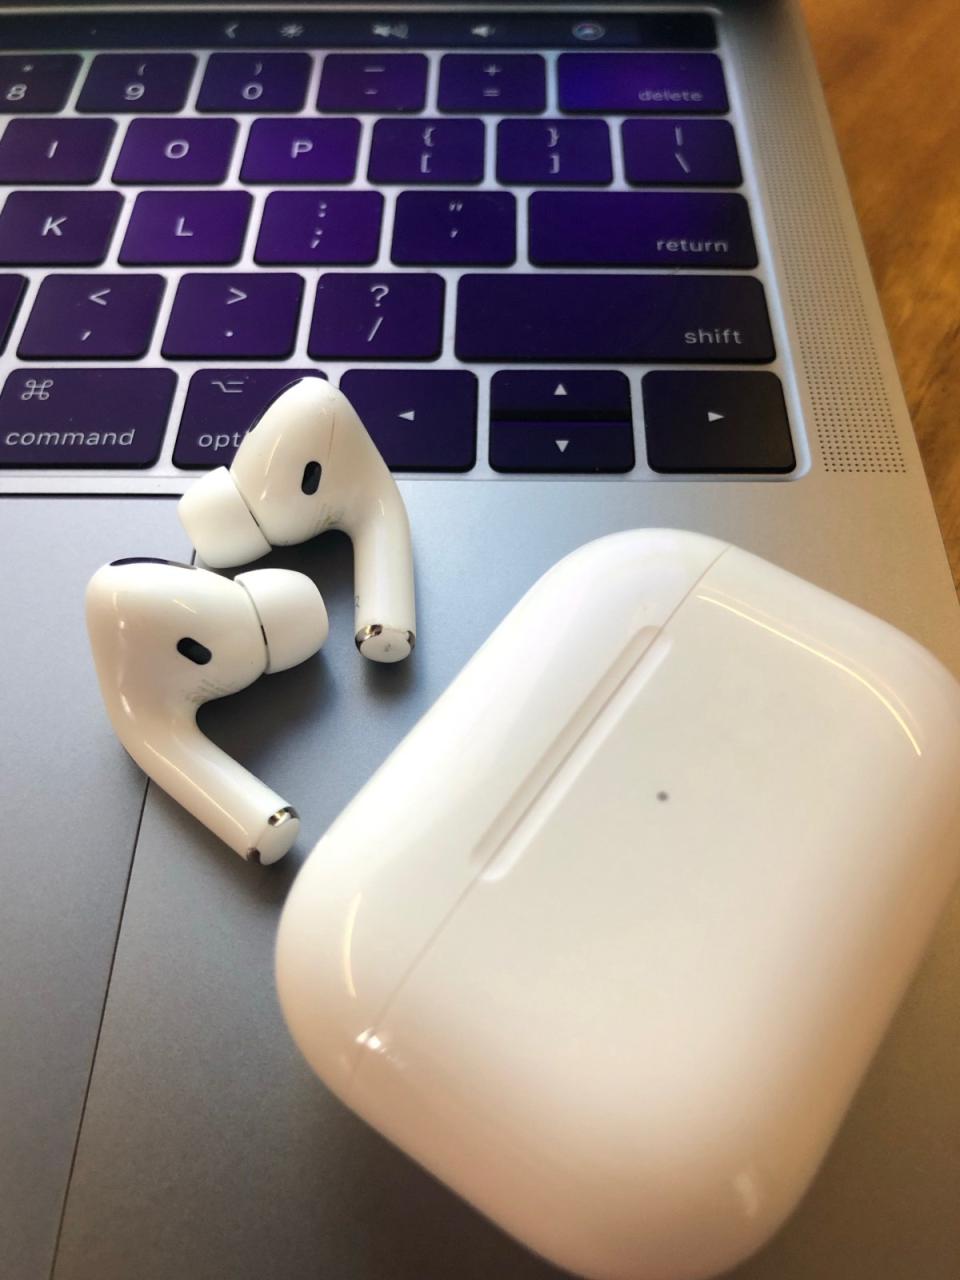 how do i connect my headphones to my iphone